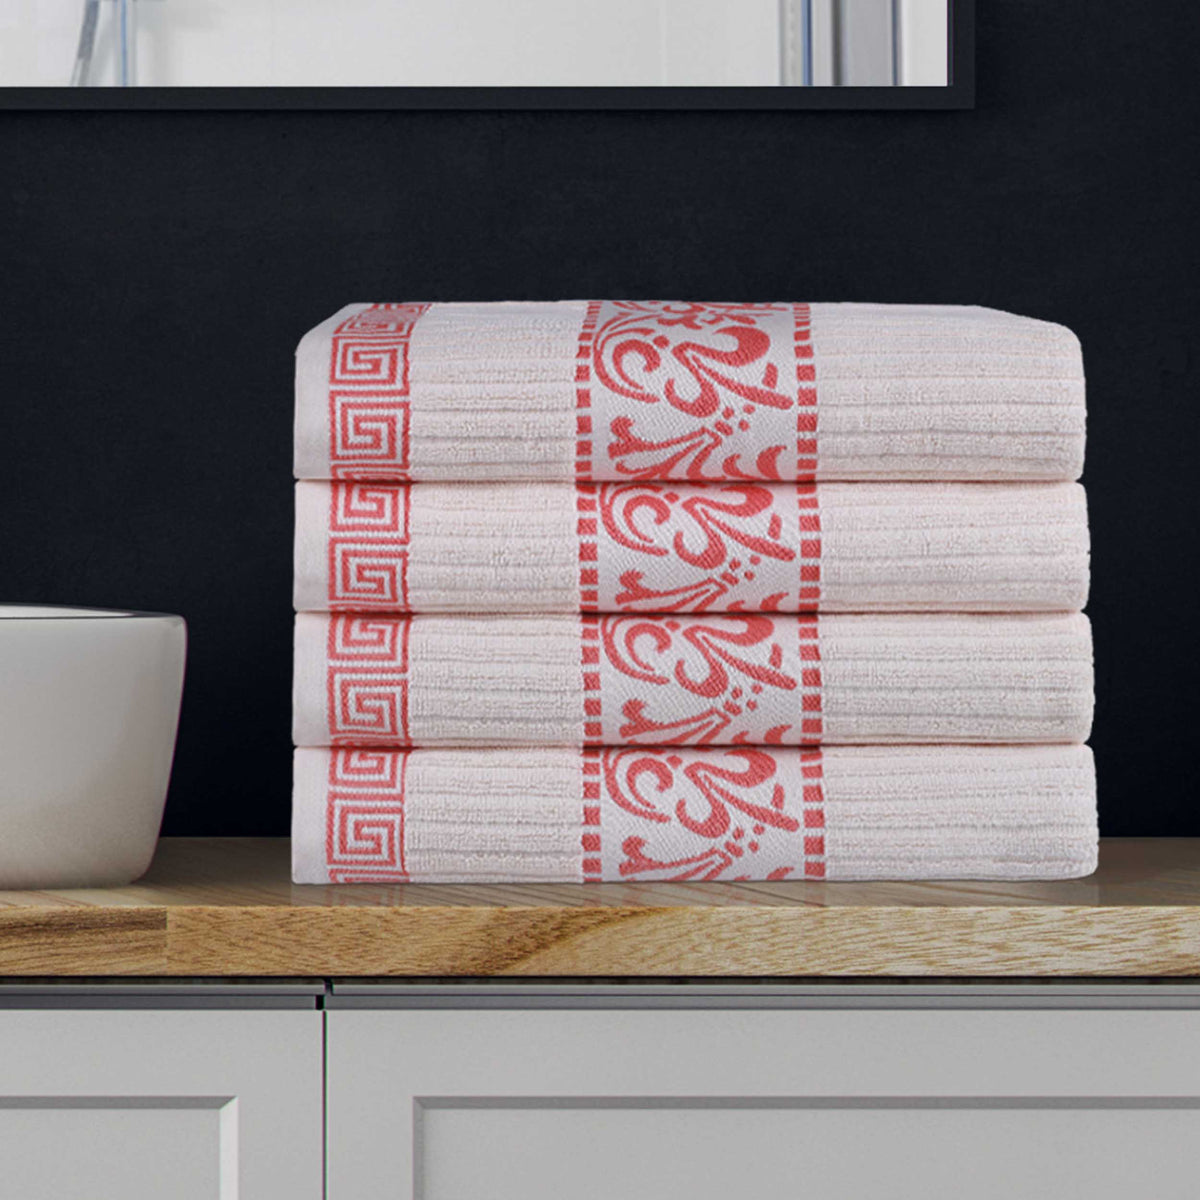 Superior Athens Cotton 4-Piece Bath Towel Set with Greek Scroll and Floral Pattern - Ivory-Coral